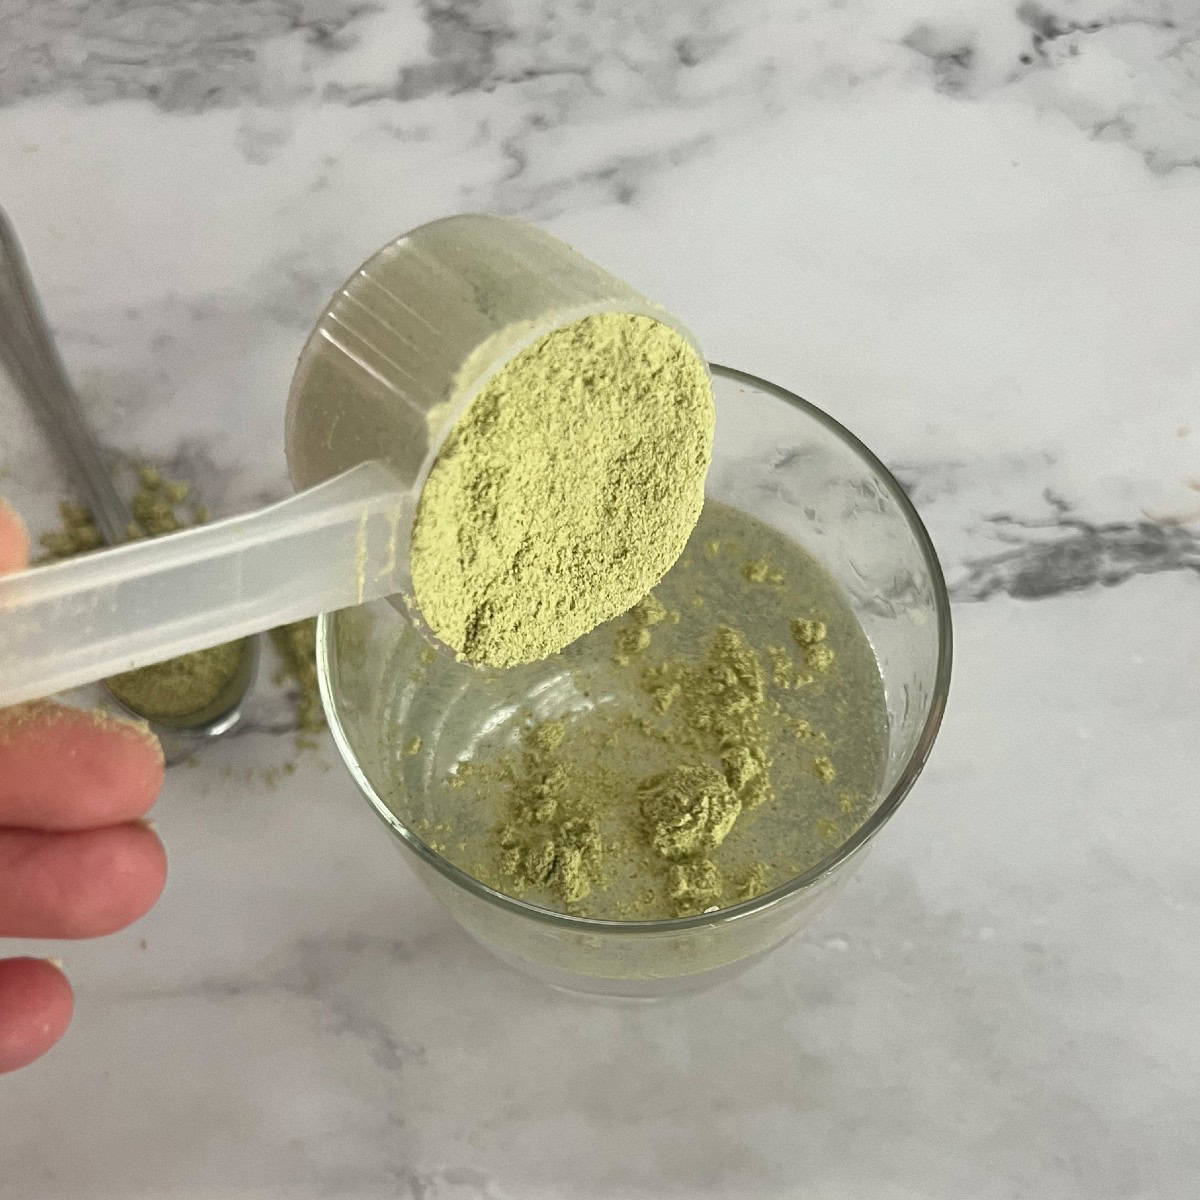 A close-up of a green powder being poured from a scoop into a glass of water. The powder is a bright green and appears to be finely ground.